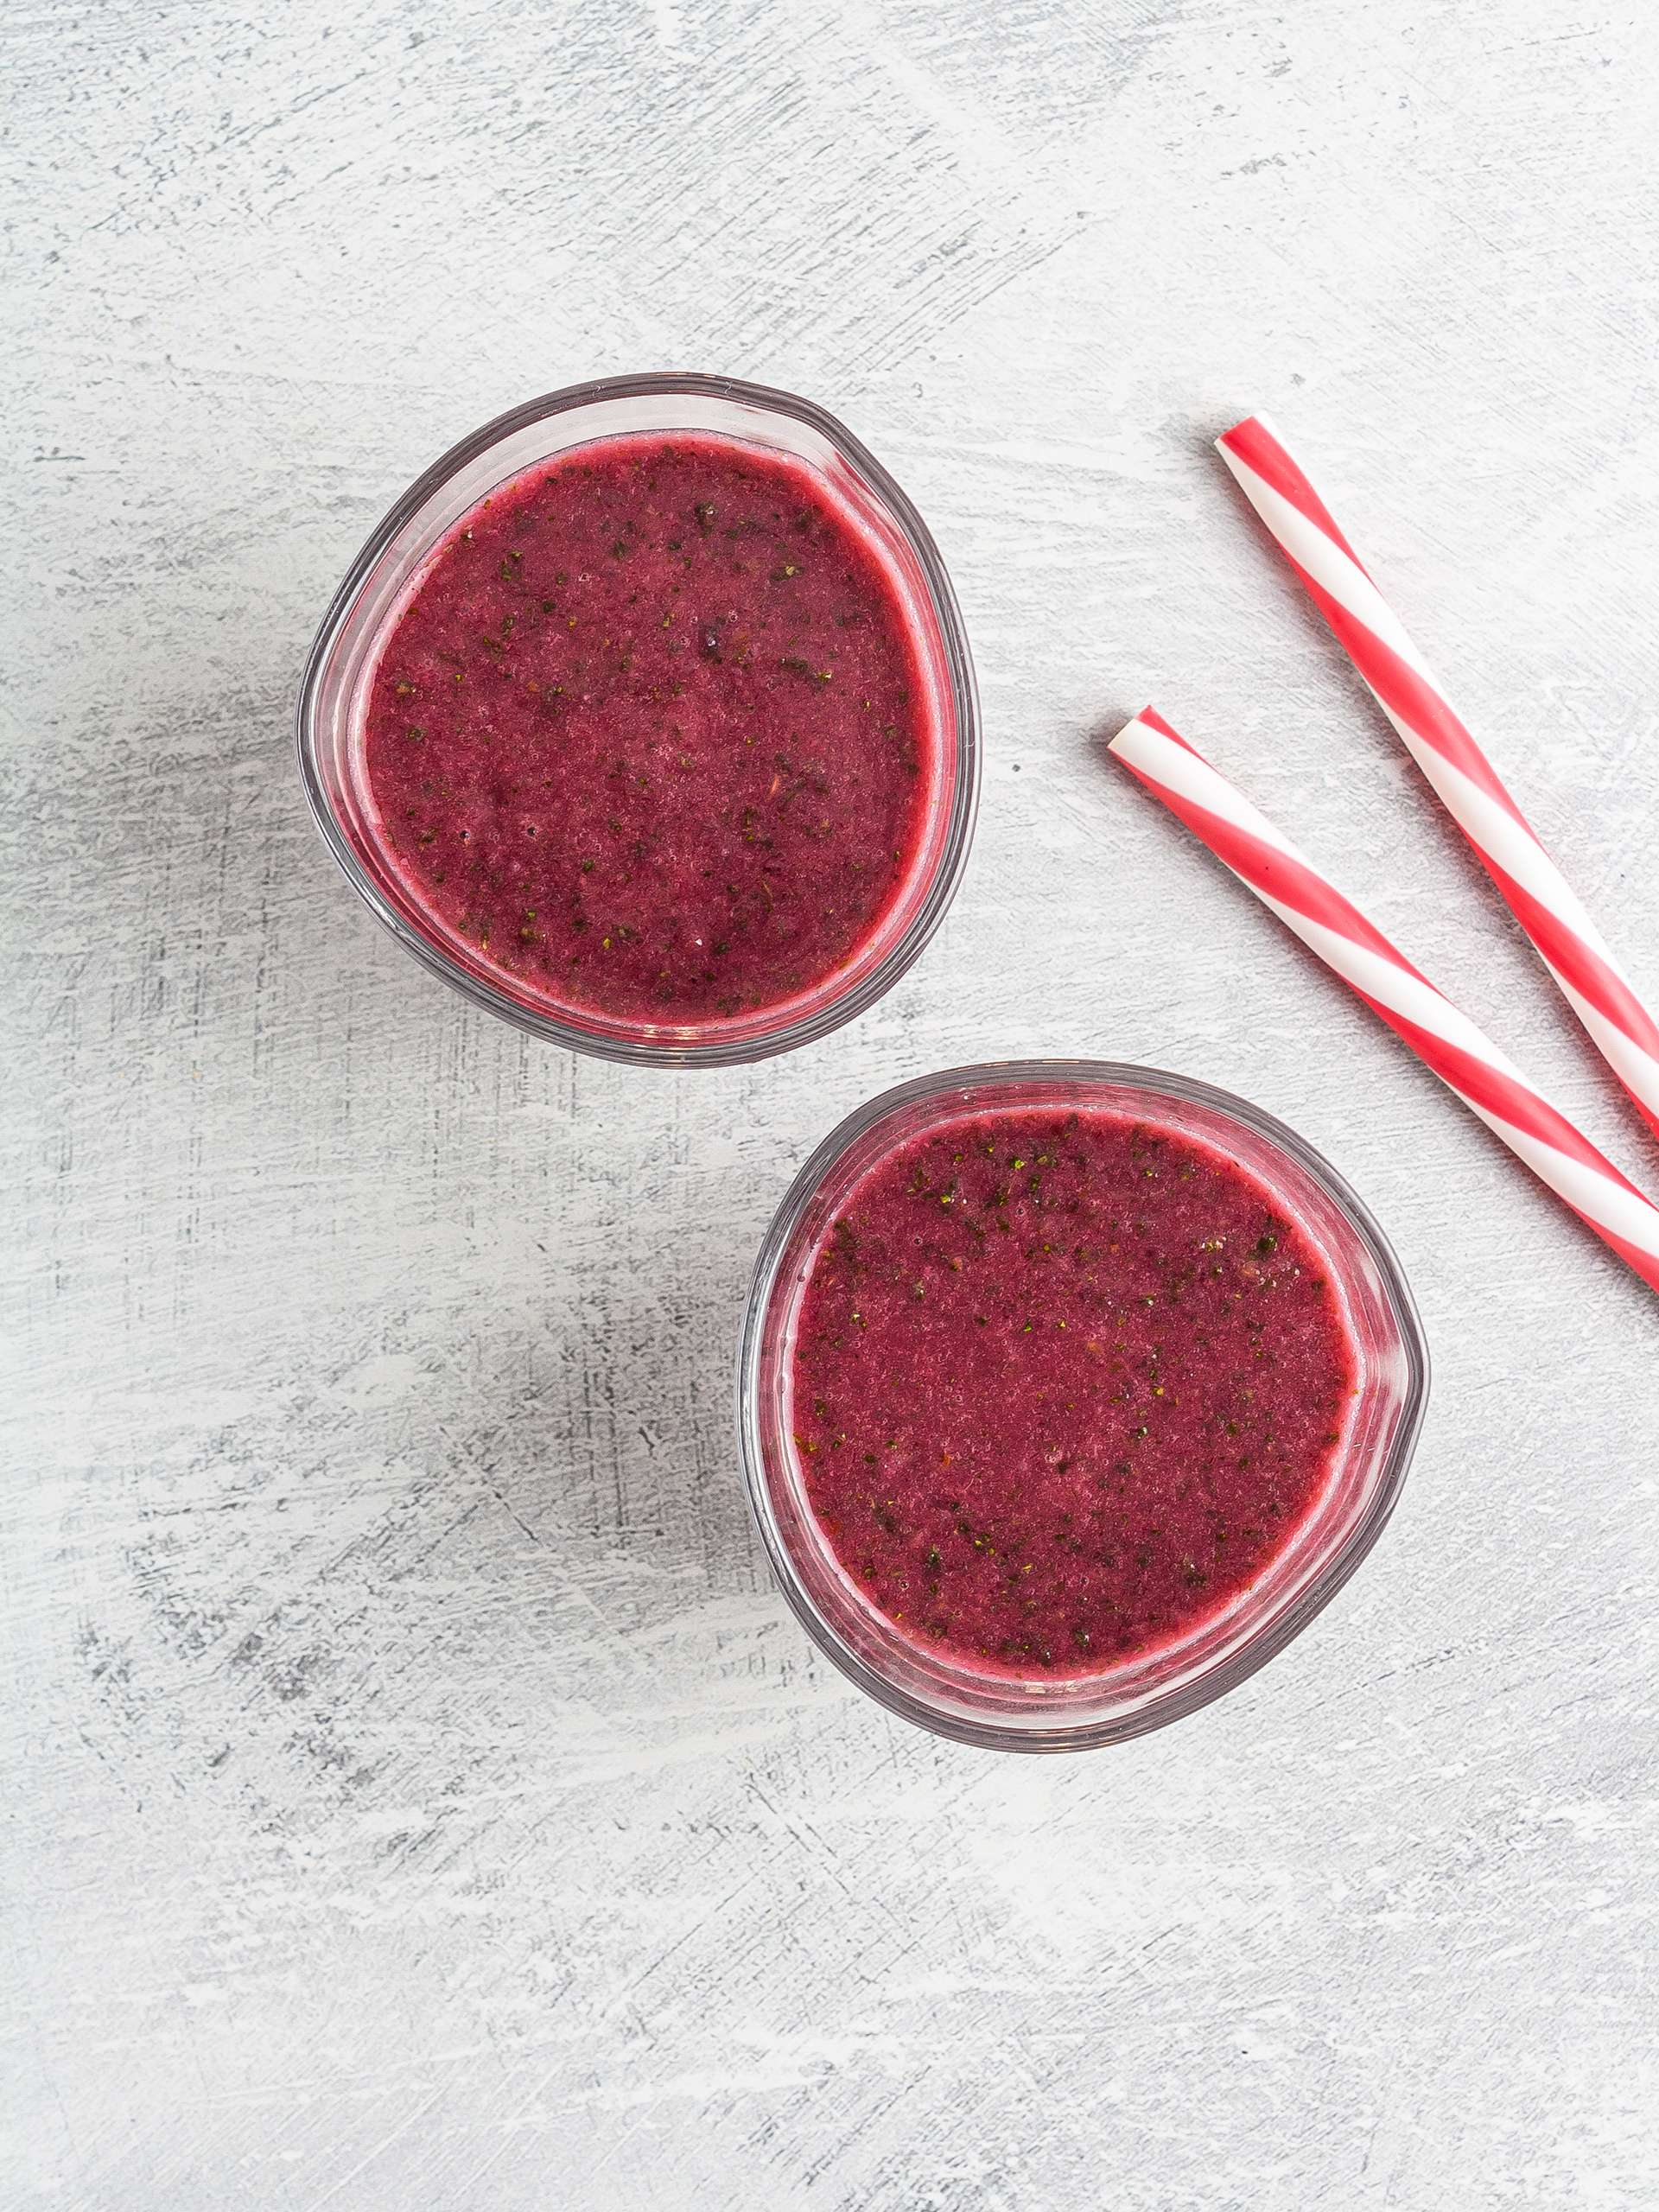 Beet and kale smoothie in a glass